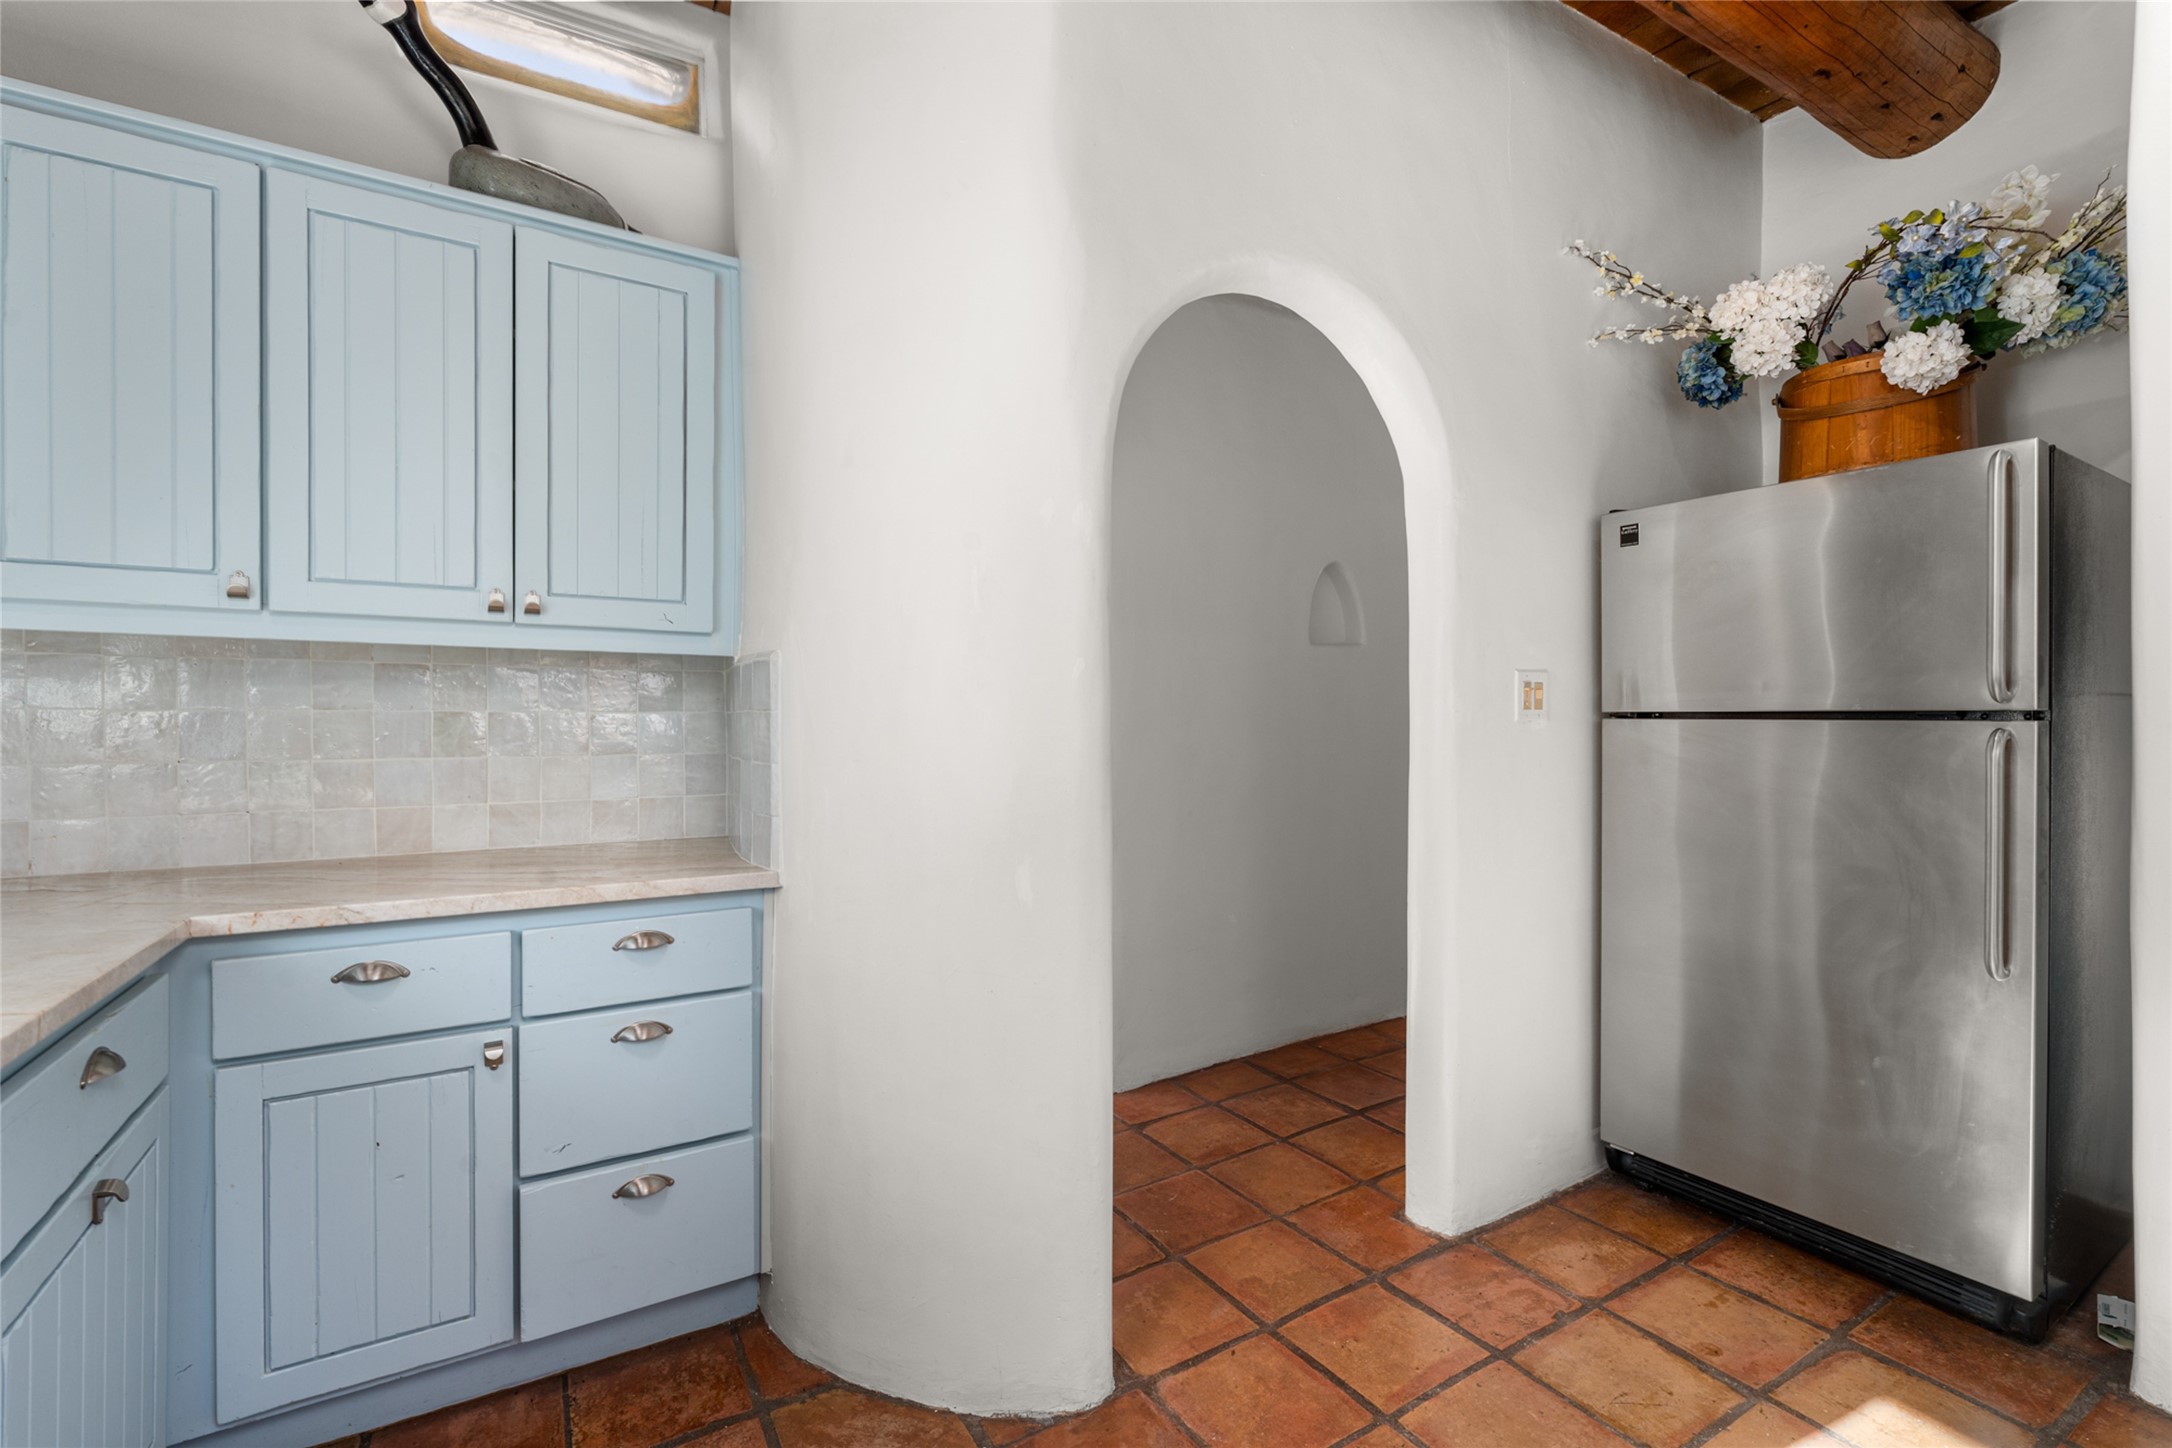 943 Canyon Road, Santa Fe, New Mexico 87501, 2 Bedrooms Bedrooms, ,2 BathroomsBathrooms,Residential,For Sale,943 Canyon Road,202400006